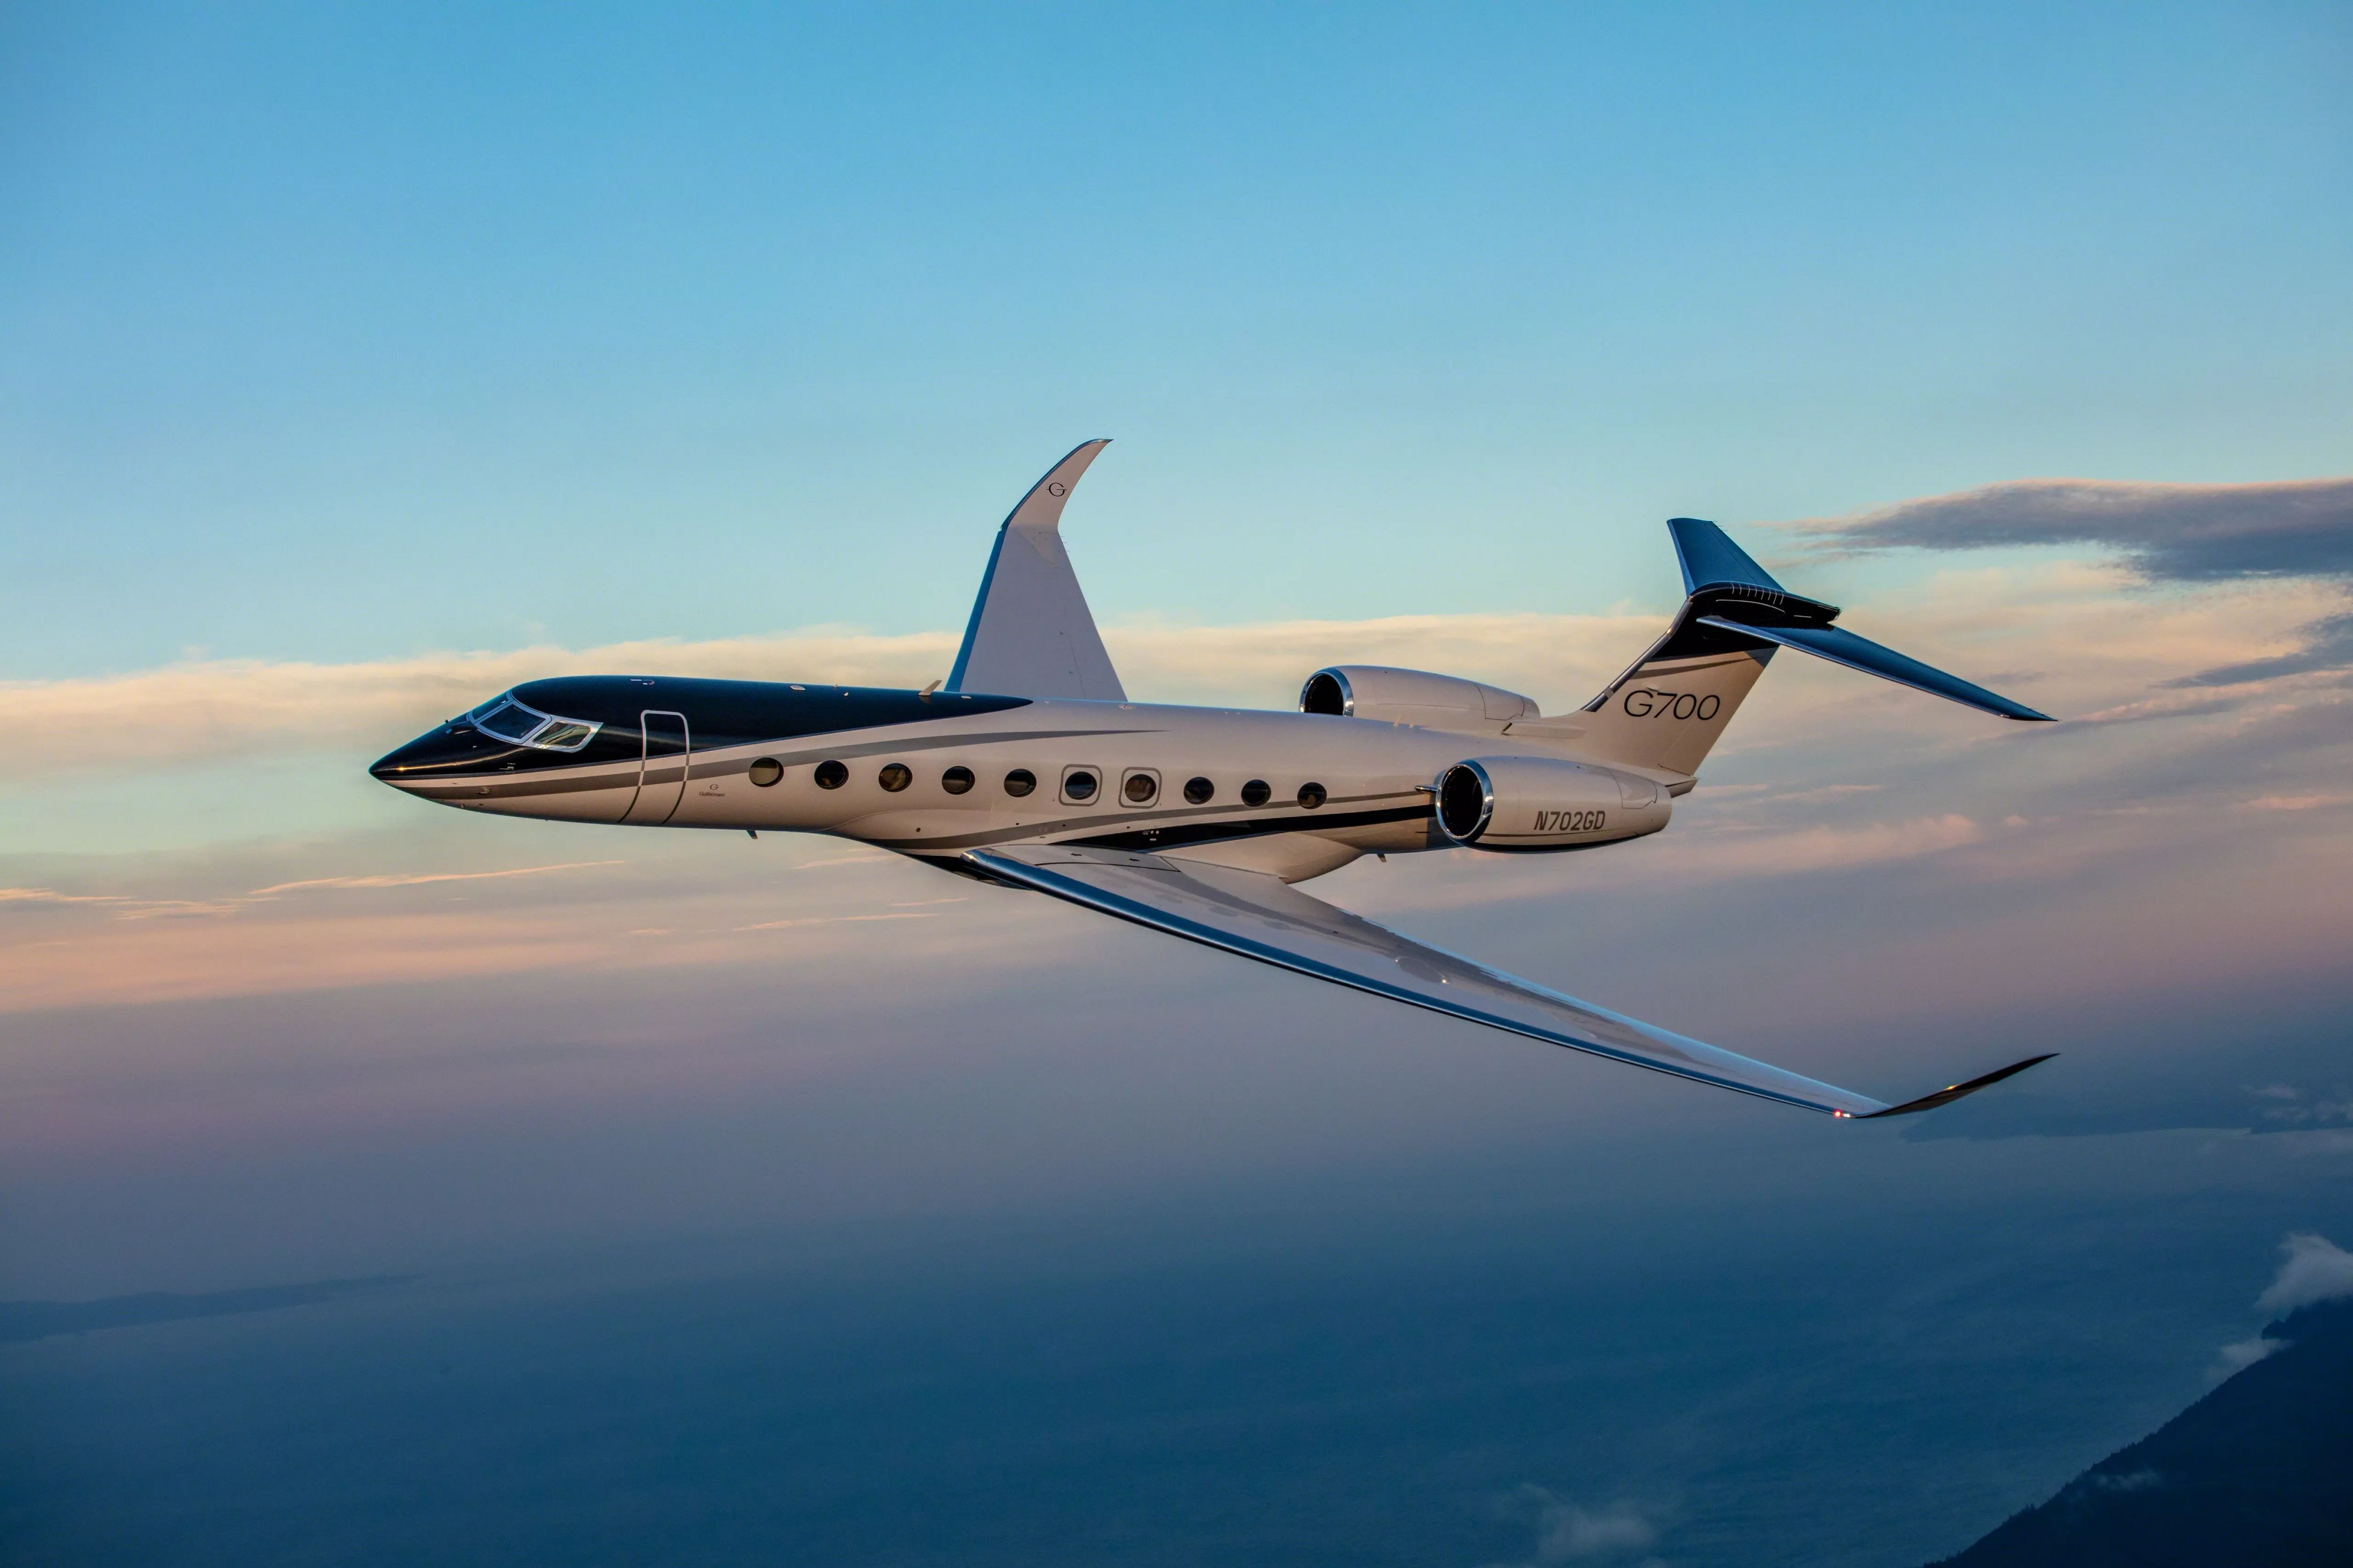 Gulfstream G700 surpassed 50 city-pair speed records en route to the Singapore Airshow.